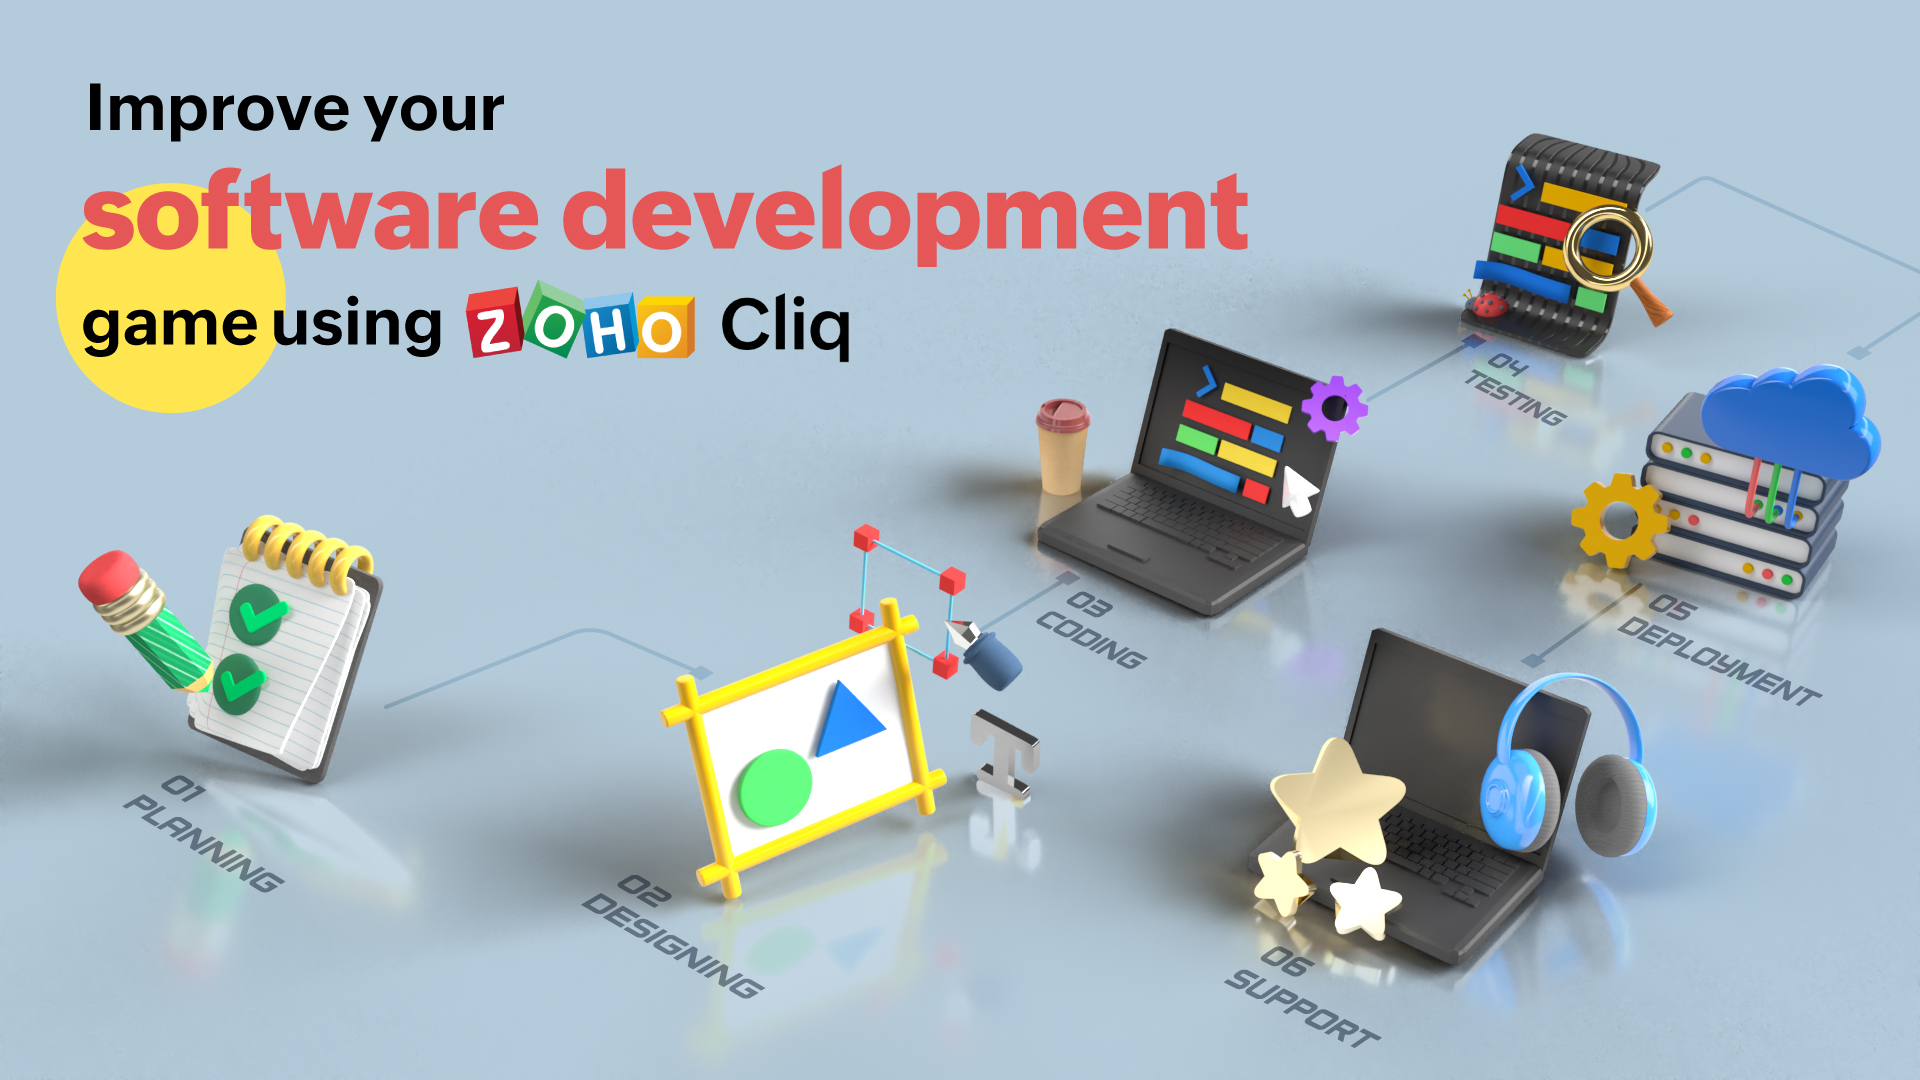 How to use Zoho Cliq to build great software